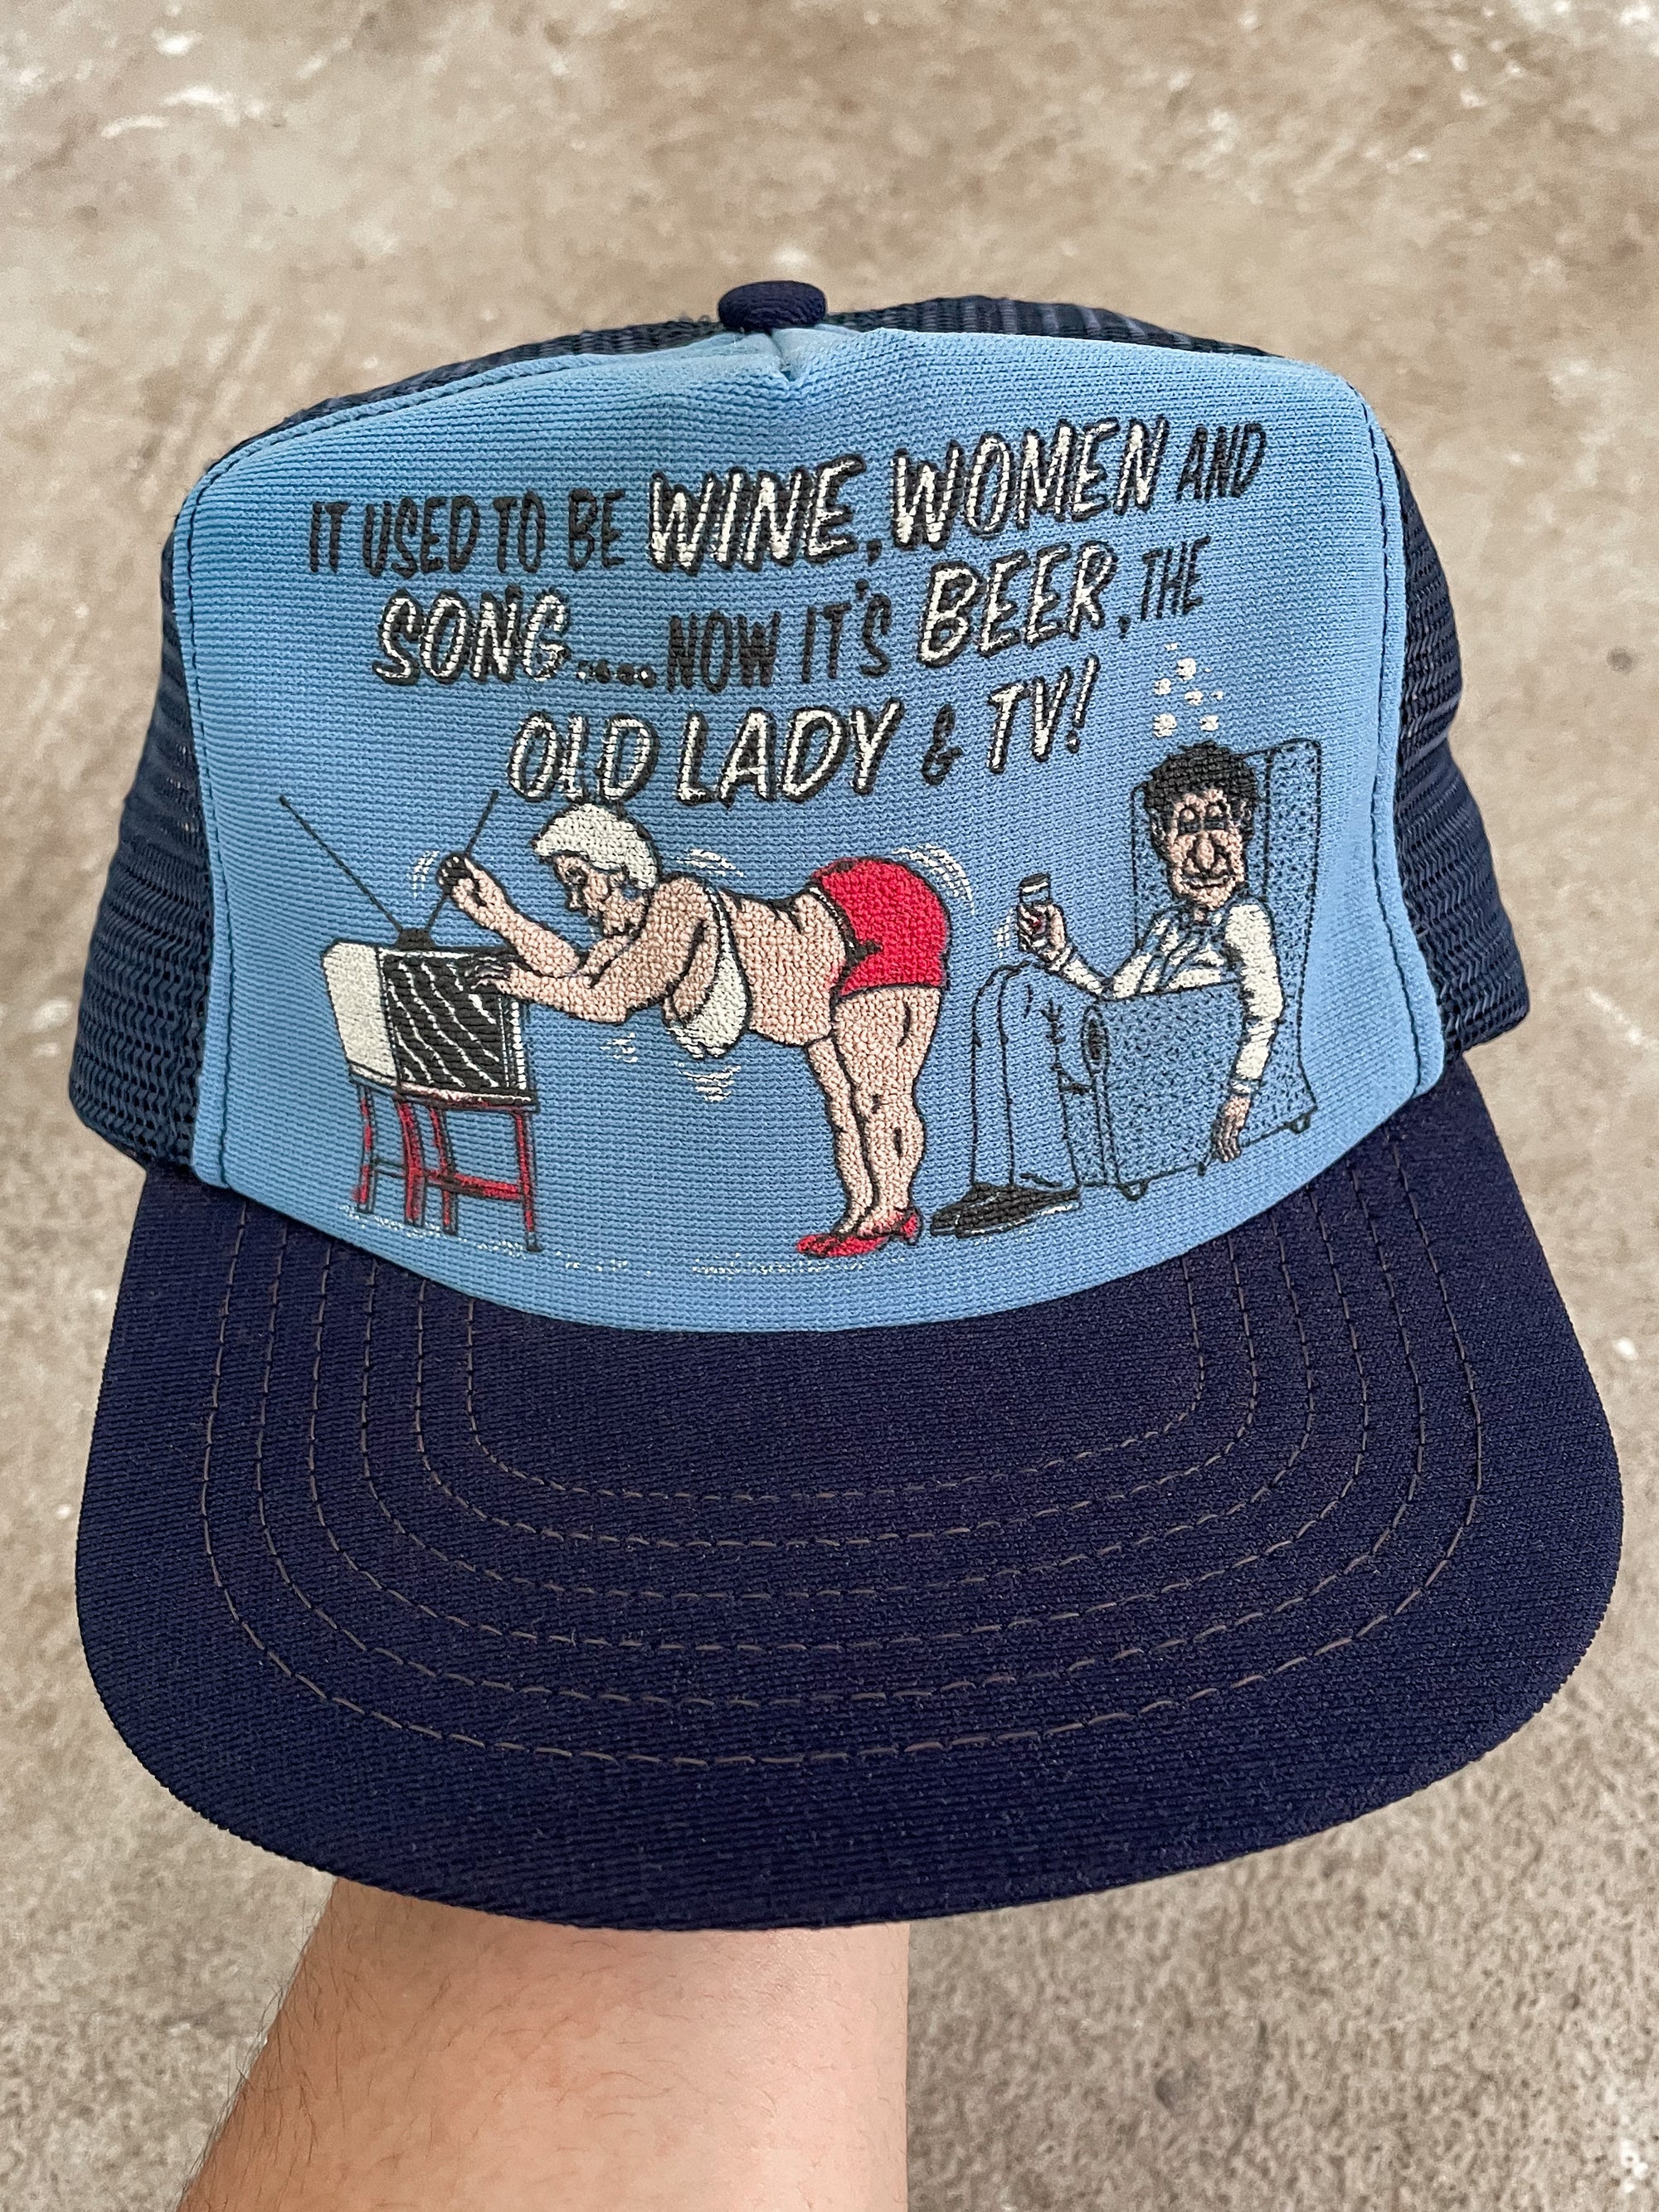 1980s “It Used To Be Wine, Women, And Song…” Trucker Hat